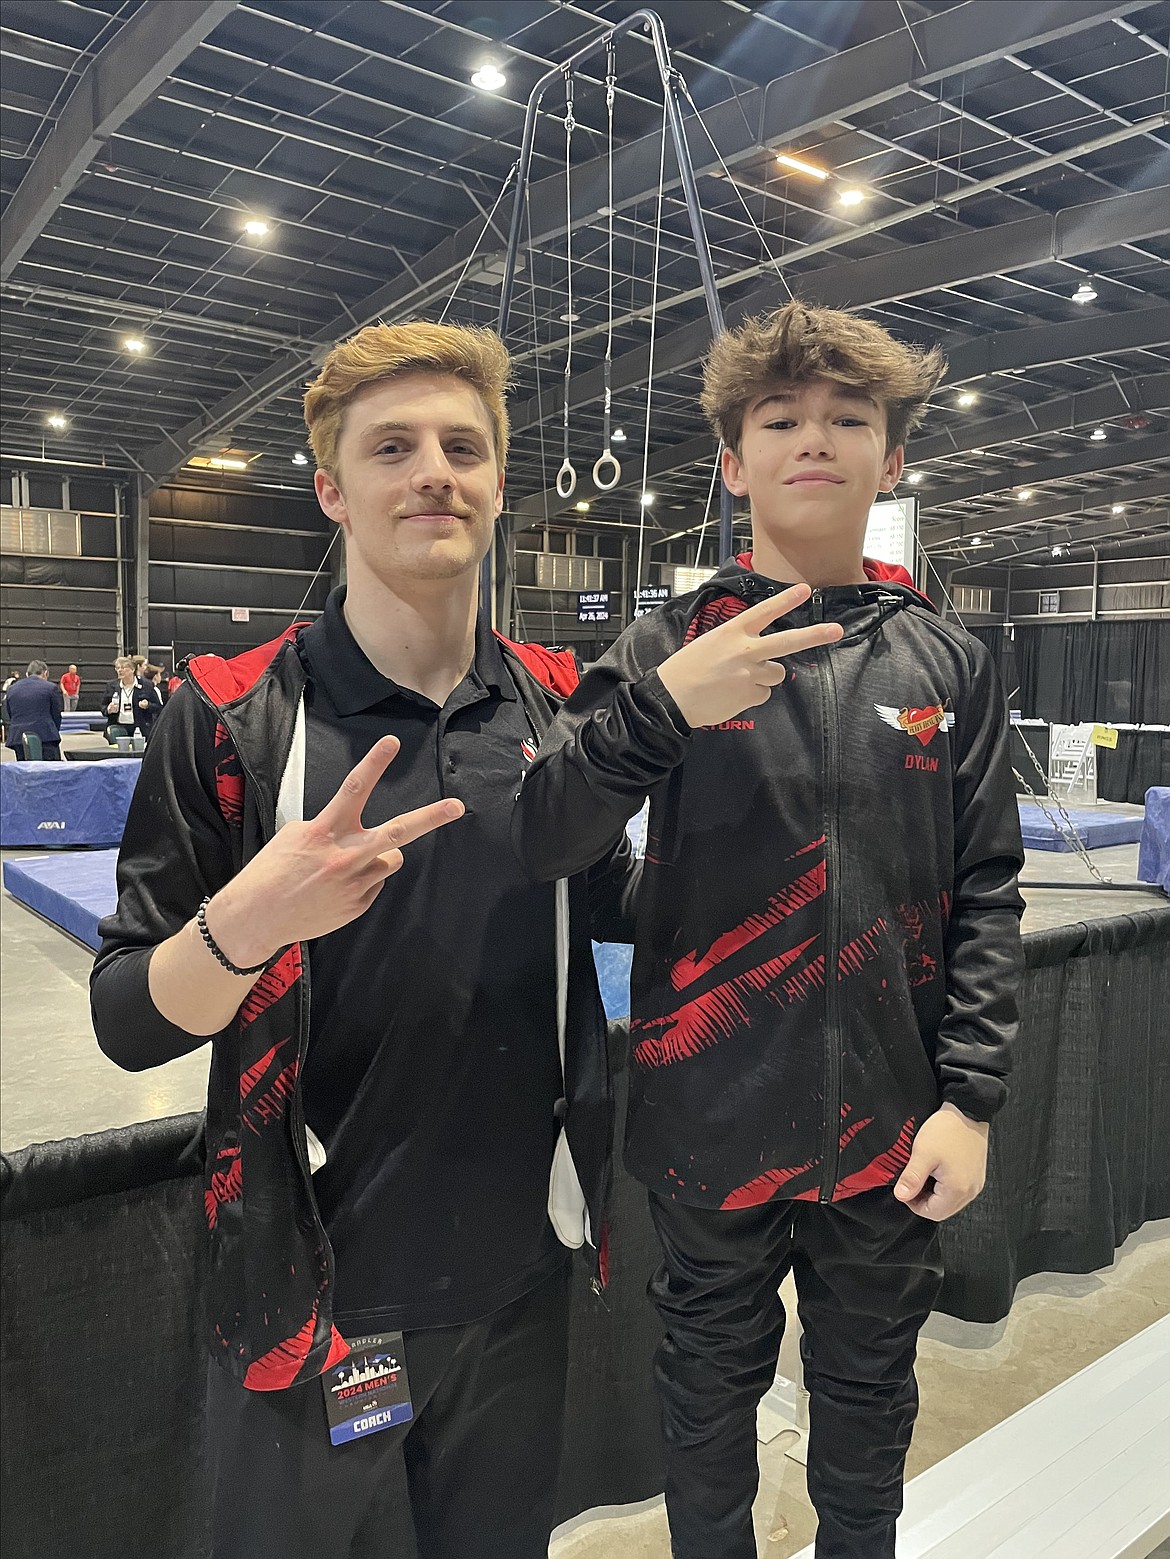 Courtesy photo
Avant Coeur Gymnastics coach Matthew Auerbach, left, and Level 9 Dylan Coulson at Western National Championships in Chandler, Ariz.